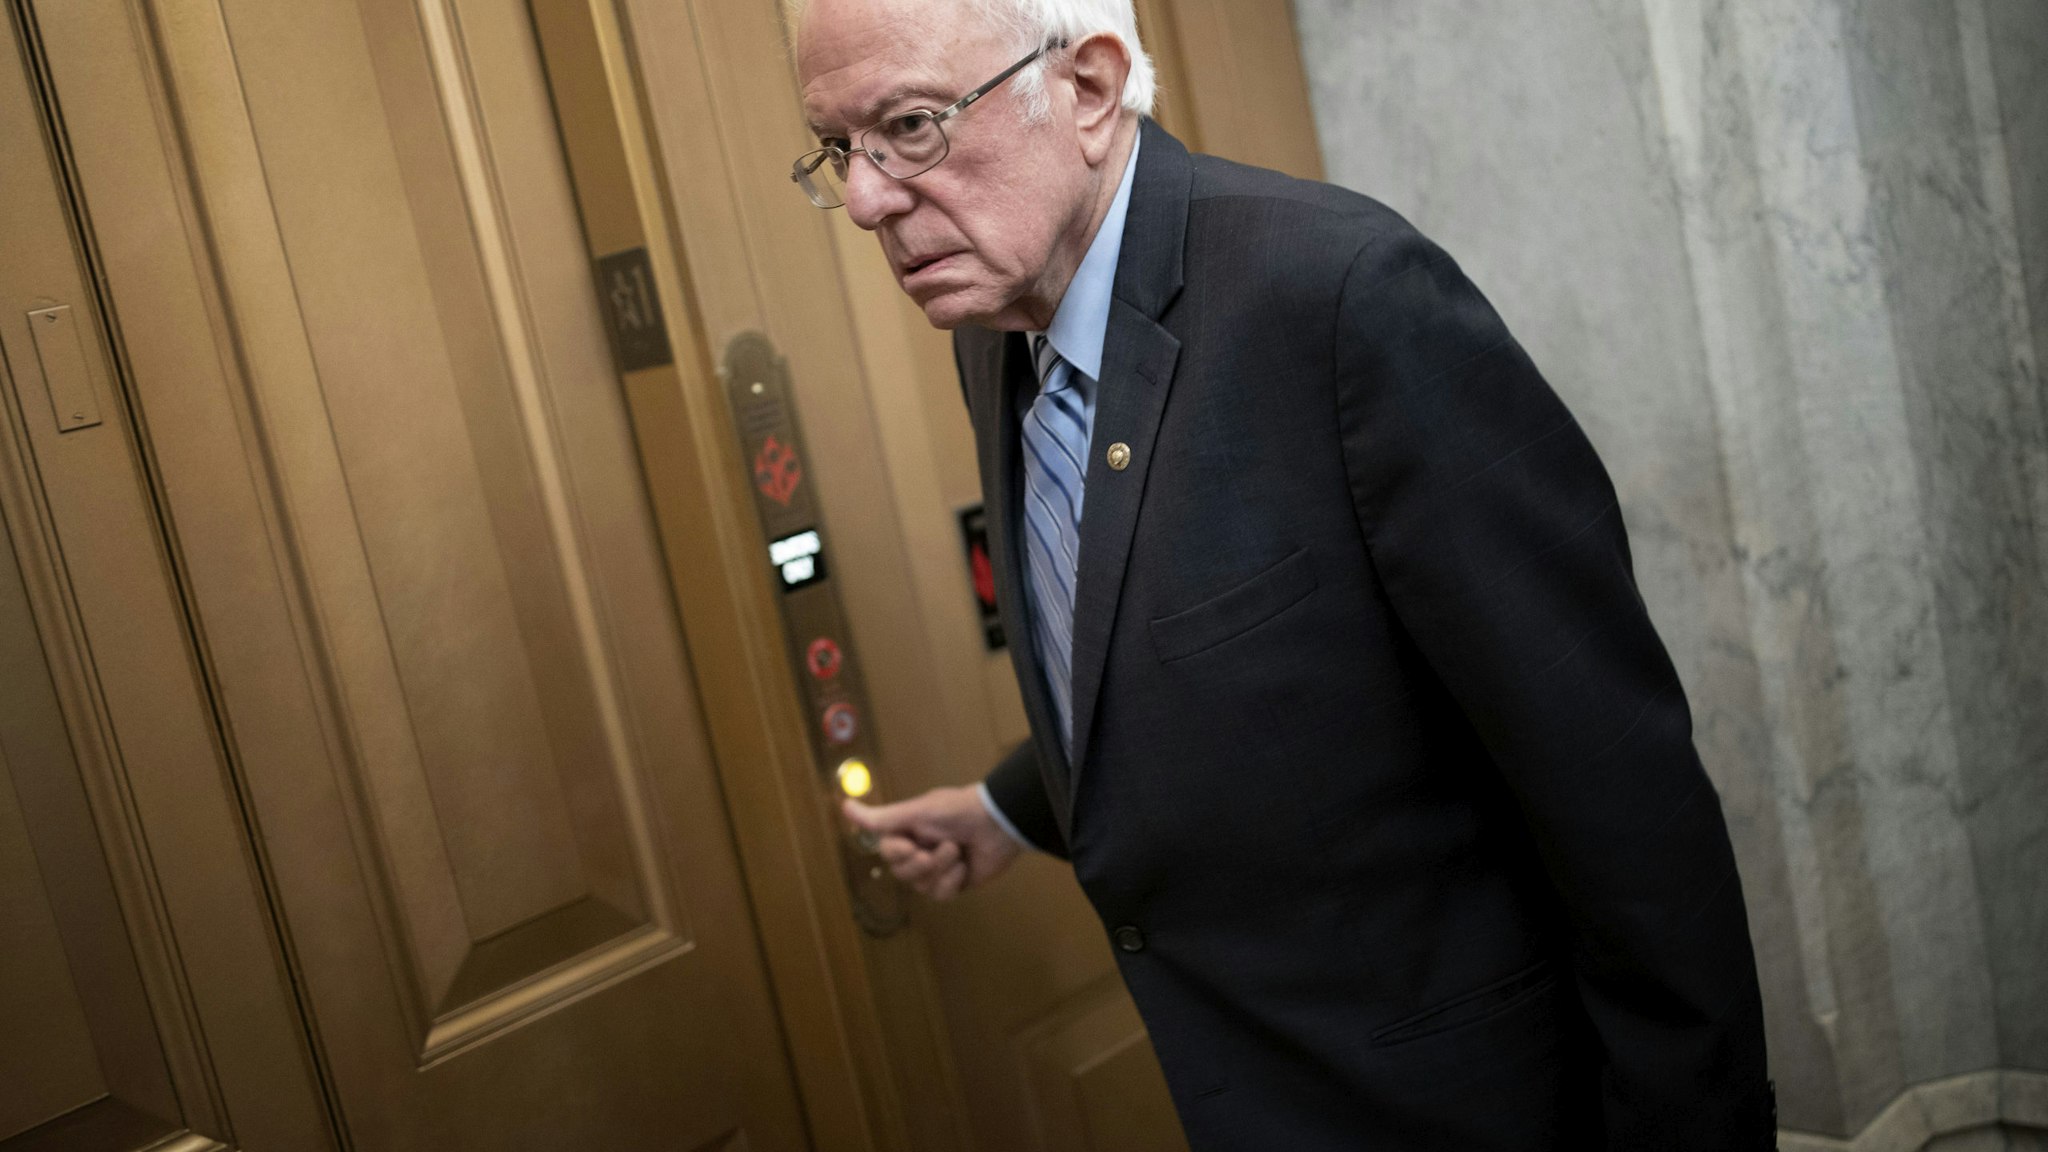 WASHINGTON, DC - MARCH 18: U.S. Sen. Bernie Sanders (I-VT) arrives at the U.S. Capitol for a vote on March 18, 2020 in Washington, DC. Senate Majority Leader Mitch McConnell is urging members of the Senate to pass as soon as possible a second COVID-19 funding bill already passed by the House. (Photo by Win McNamee/Getty Images)